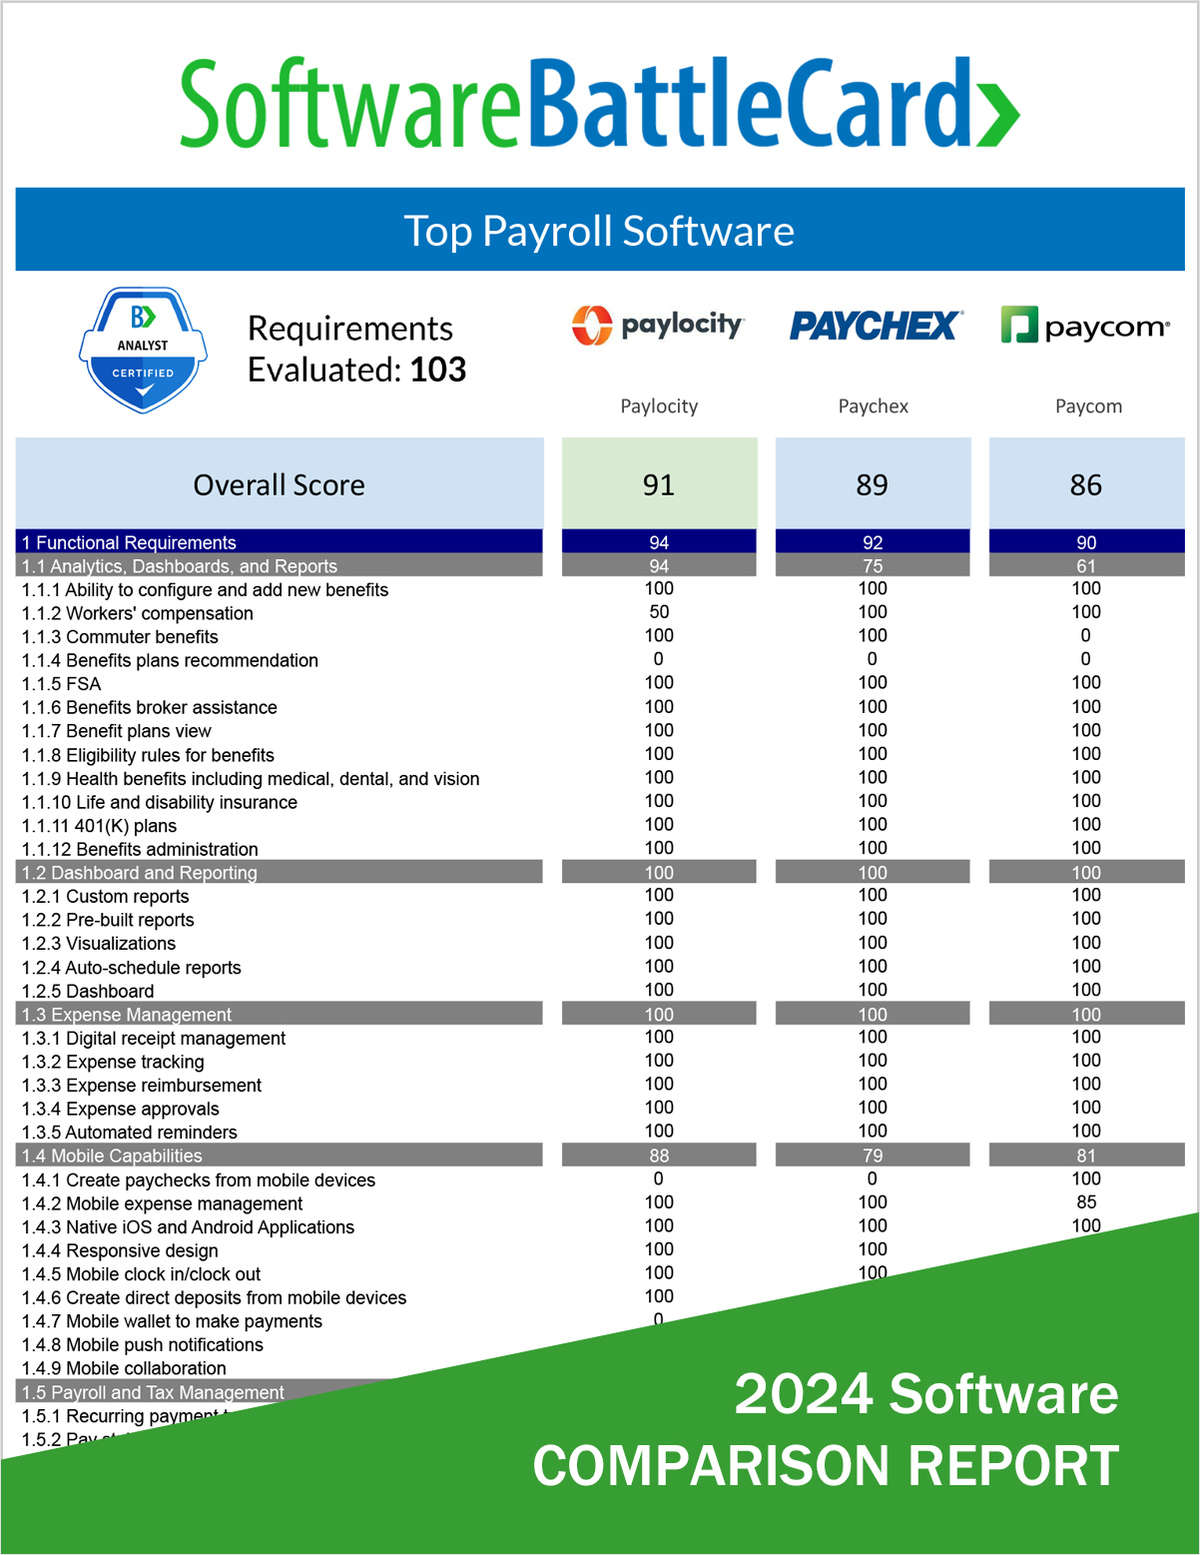 Top 'Full-Featured' Payroll Software BattleCard--Paylocity vs. Paychex vs. Paycom